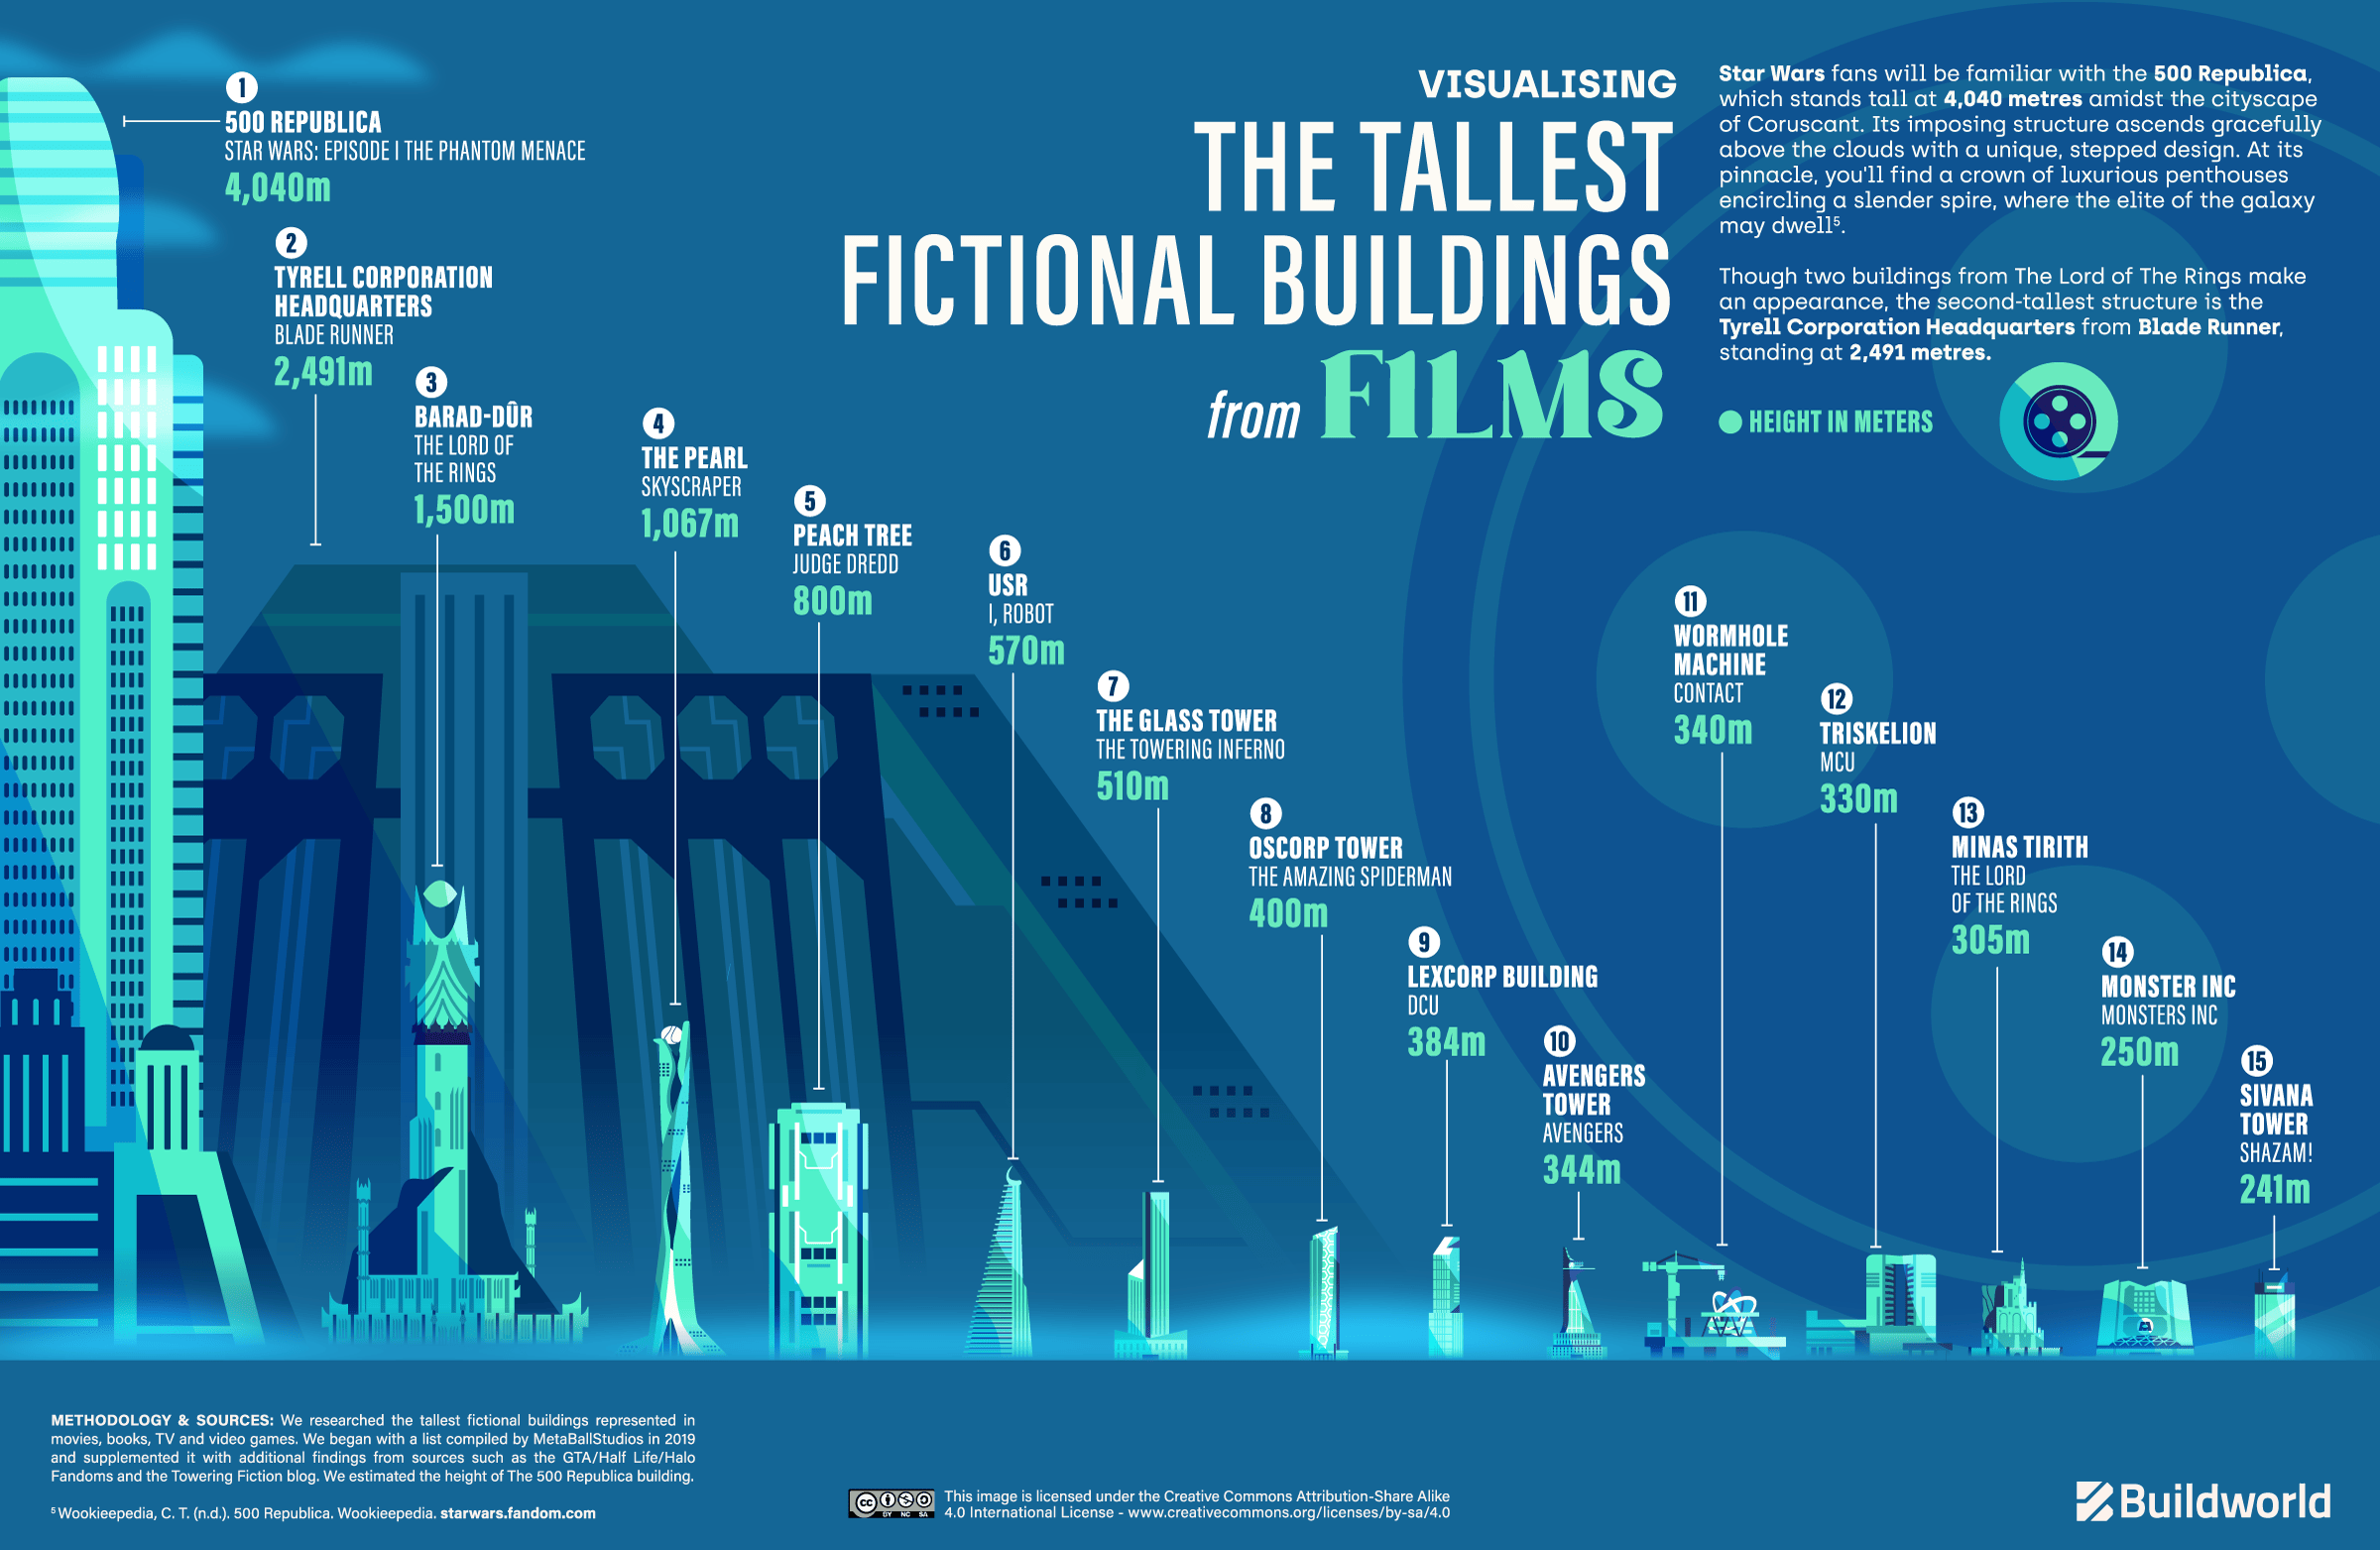 The tallest fictional buildings in films visualised